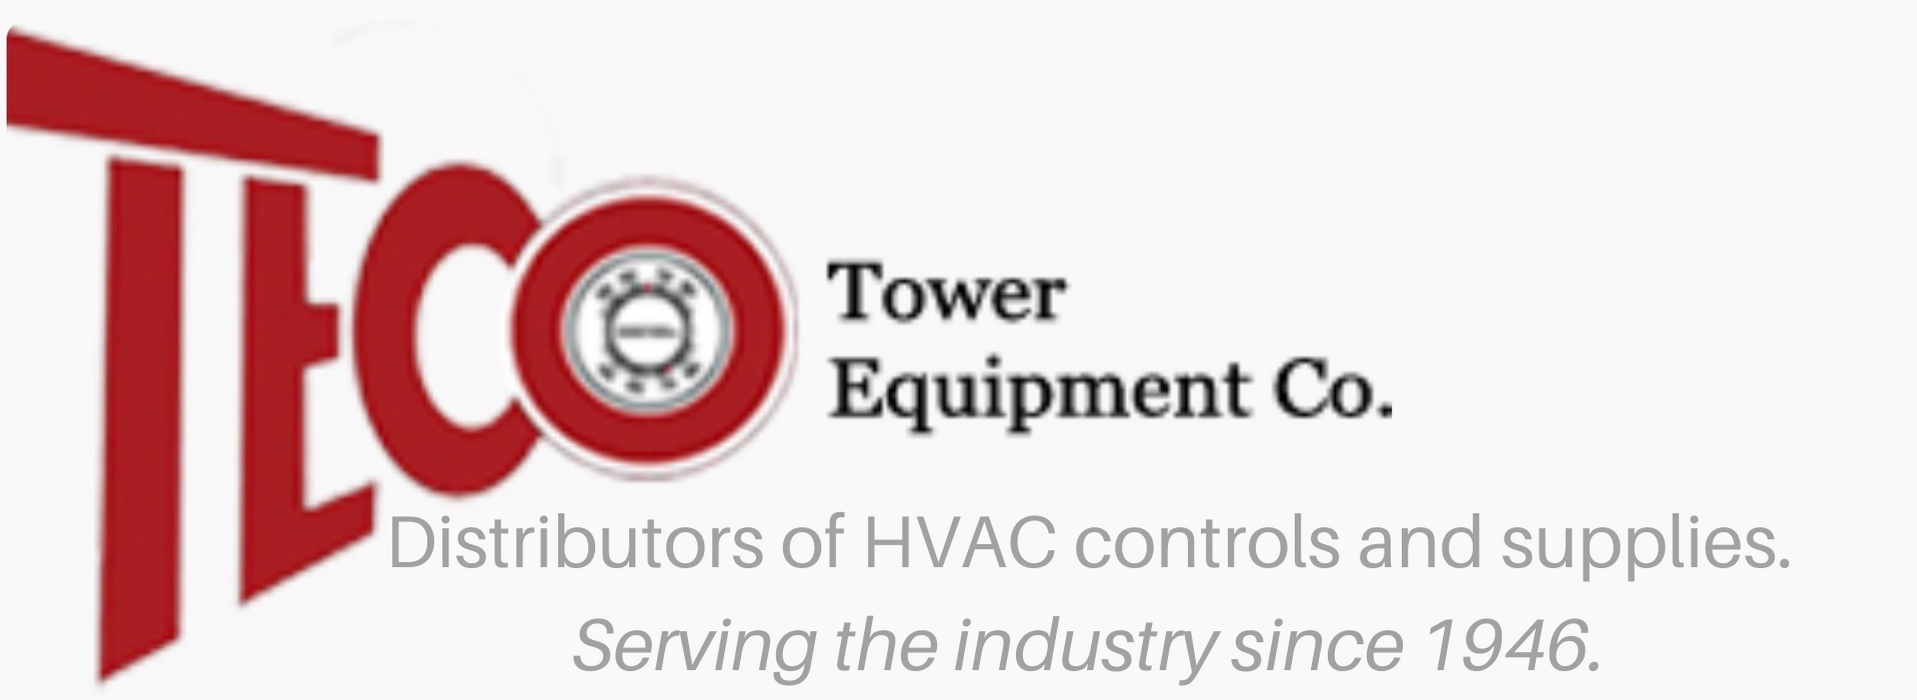 Tower Equipment Co.